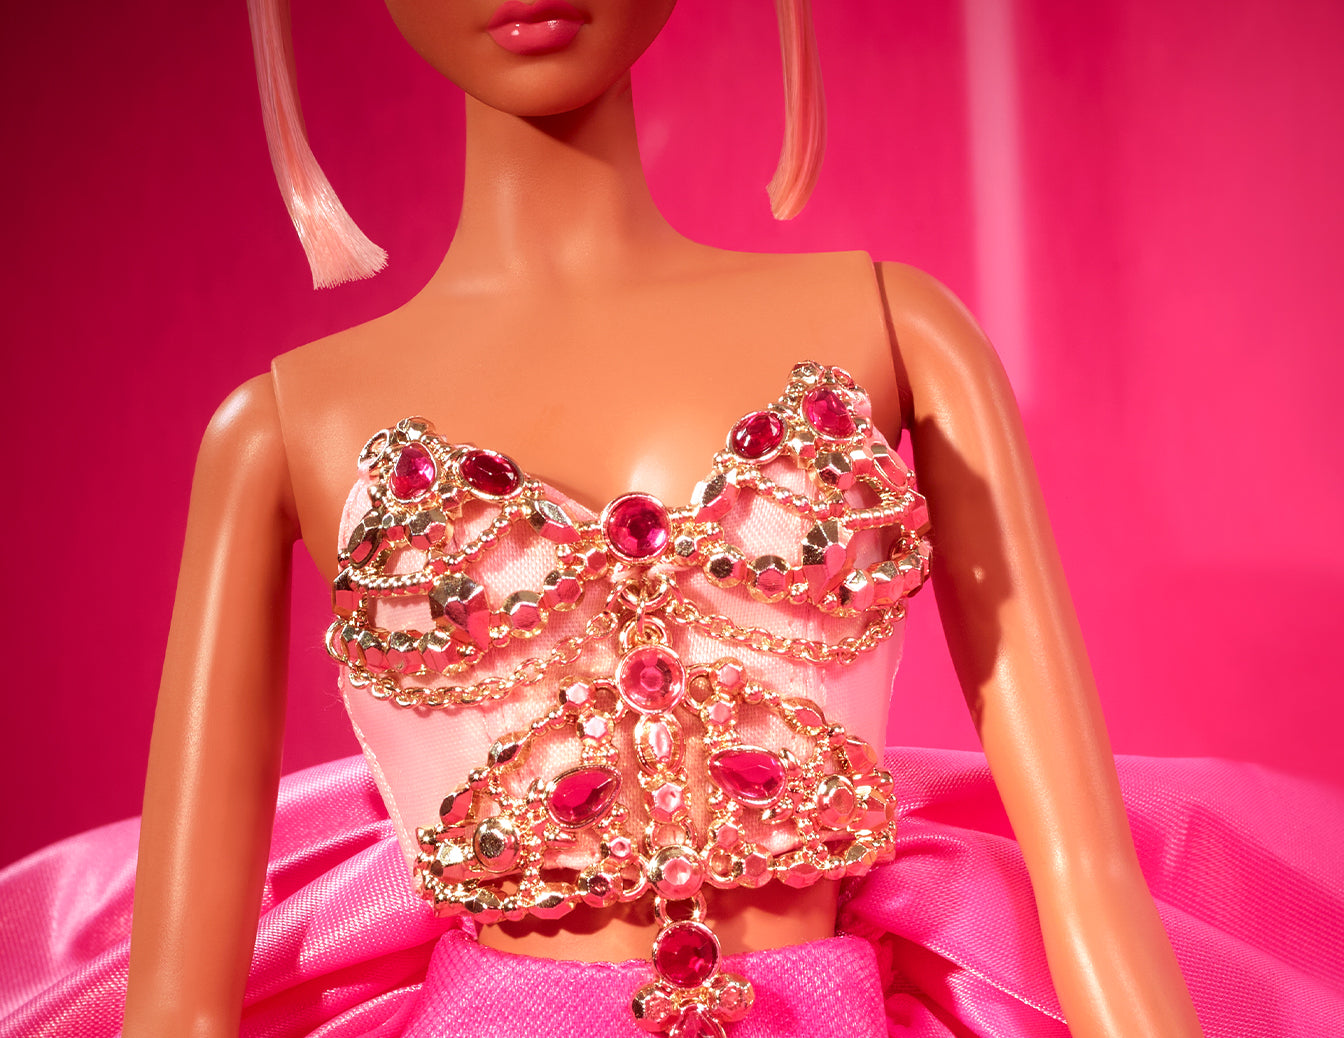 Barbie Pink Collection Doll 5 – Mattel Creations